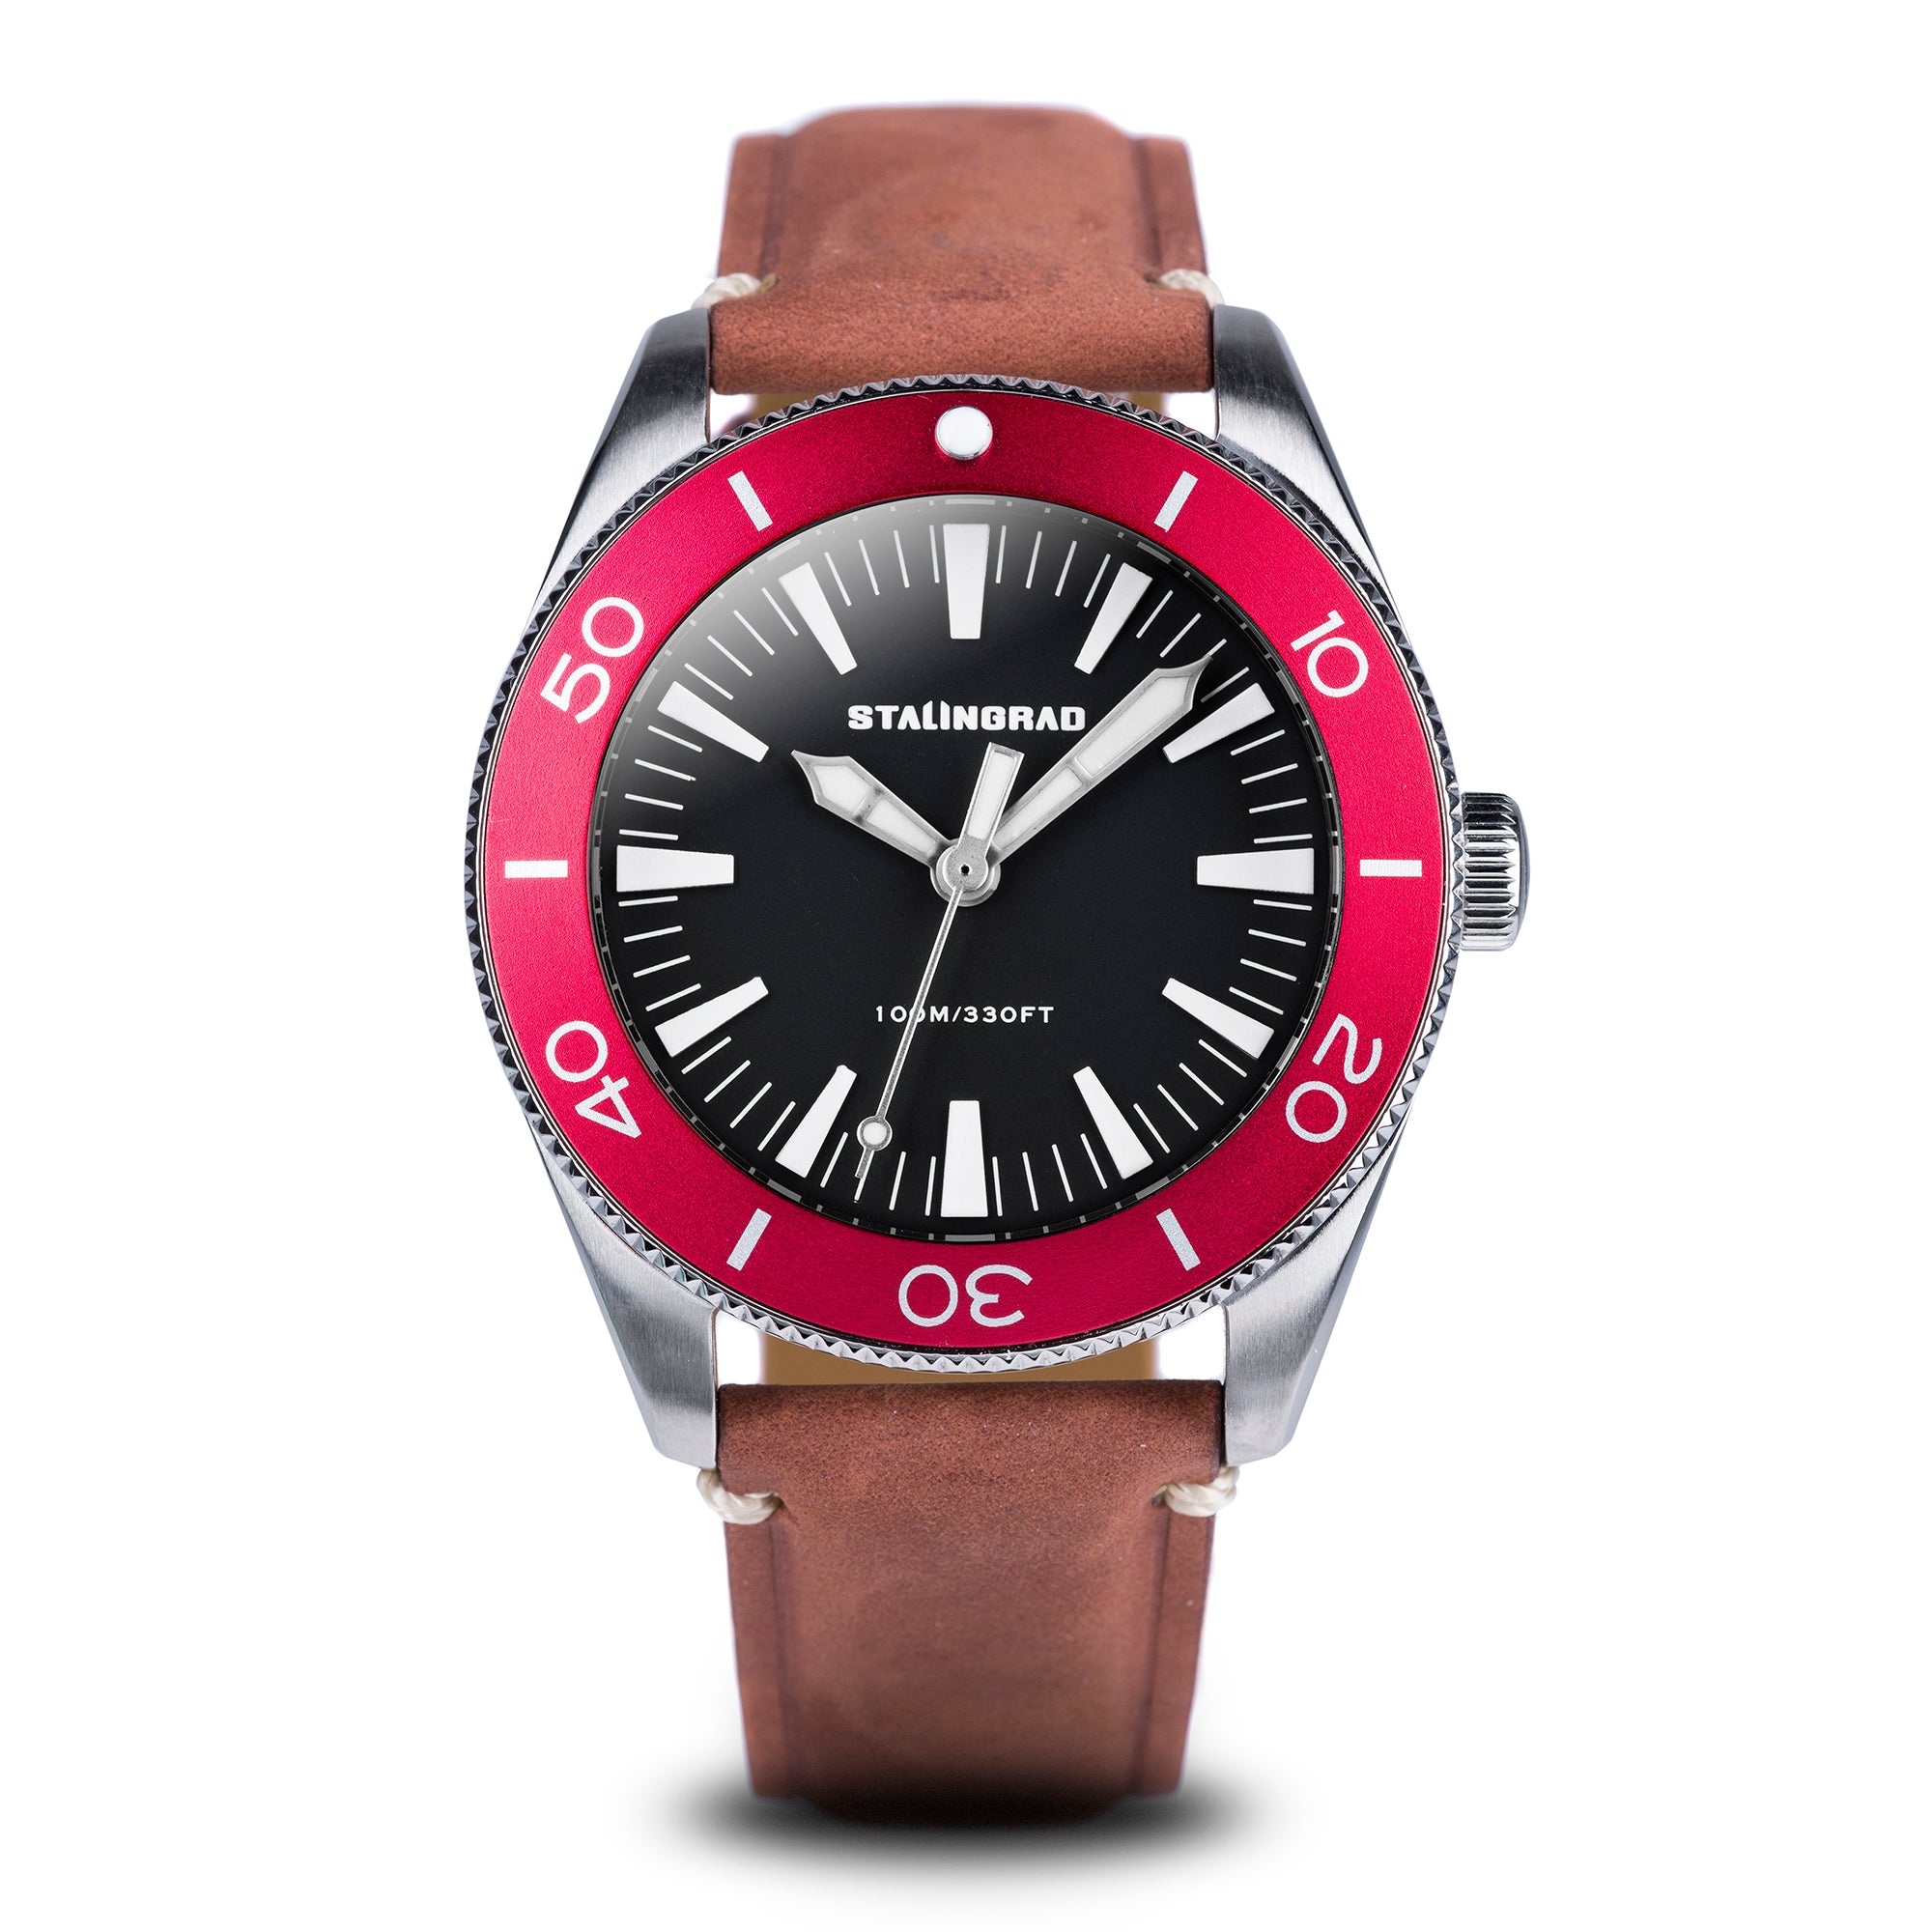 Stalingrad Iron Will Watch Black Dial with a Red Bezel and a red leather strap on a white background, front view